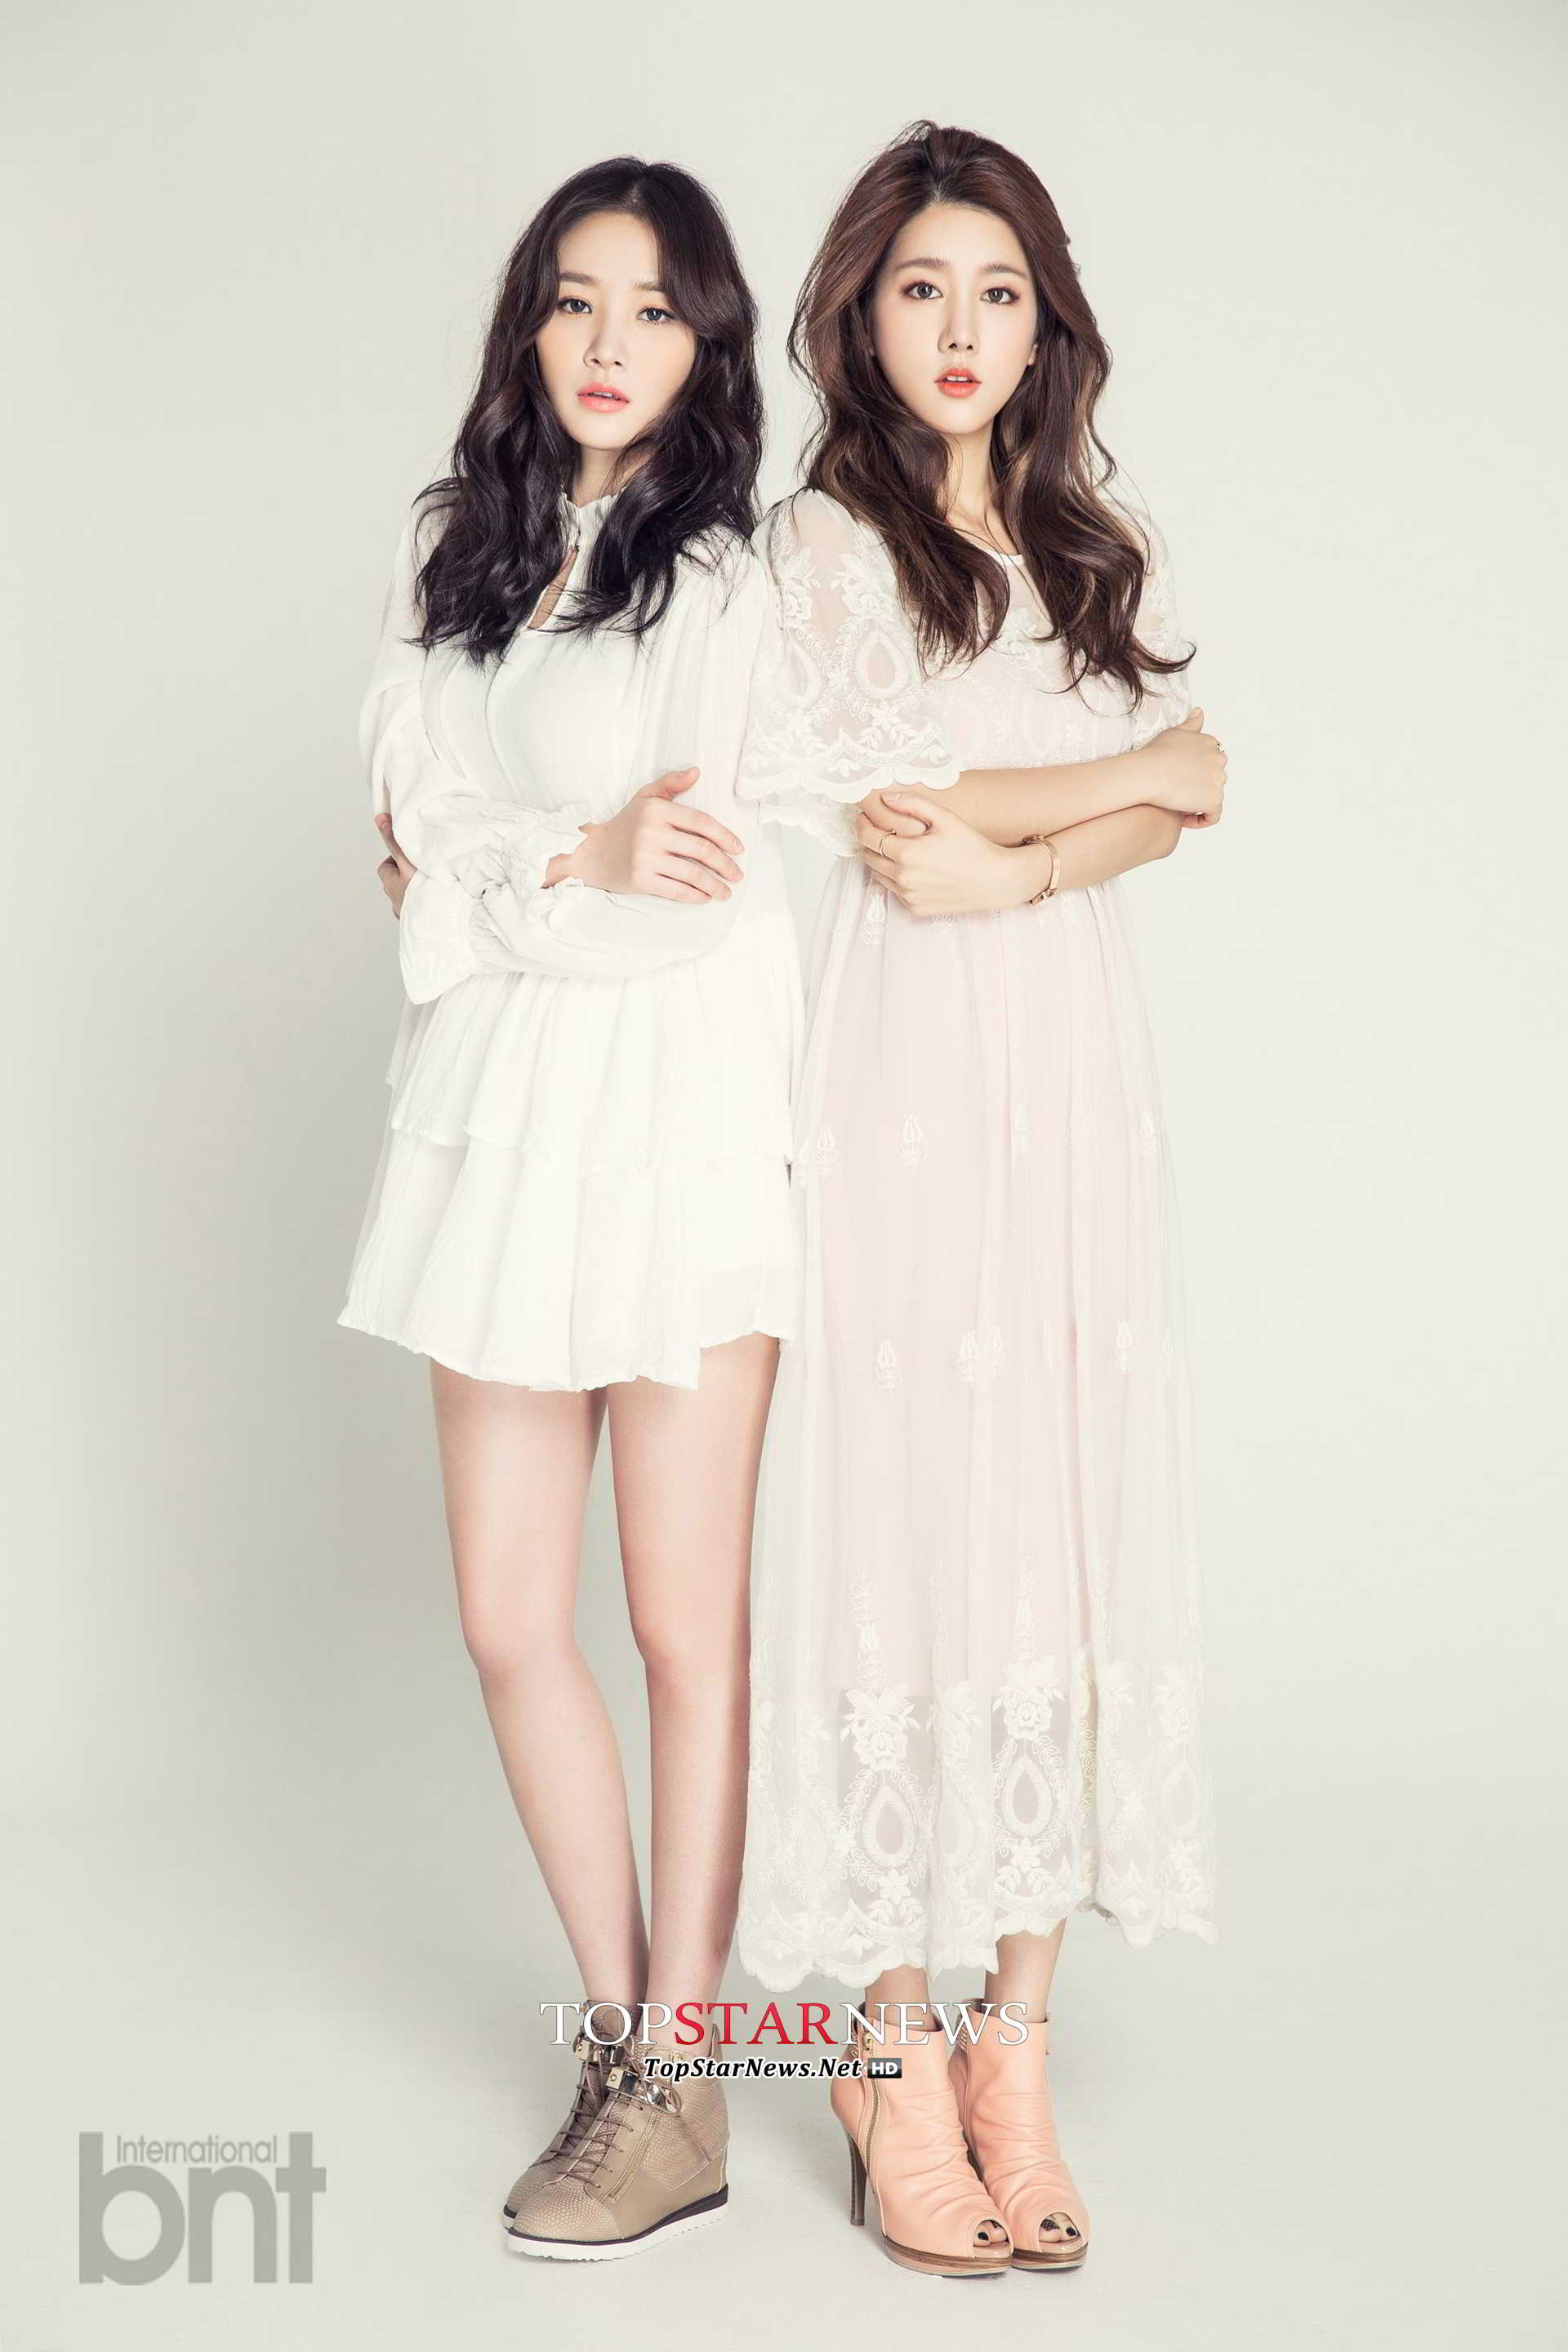 Spica - bnt (29)